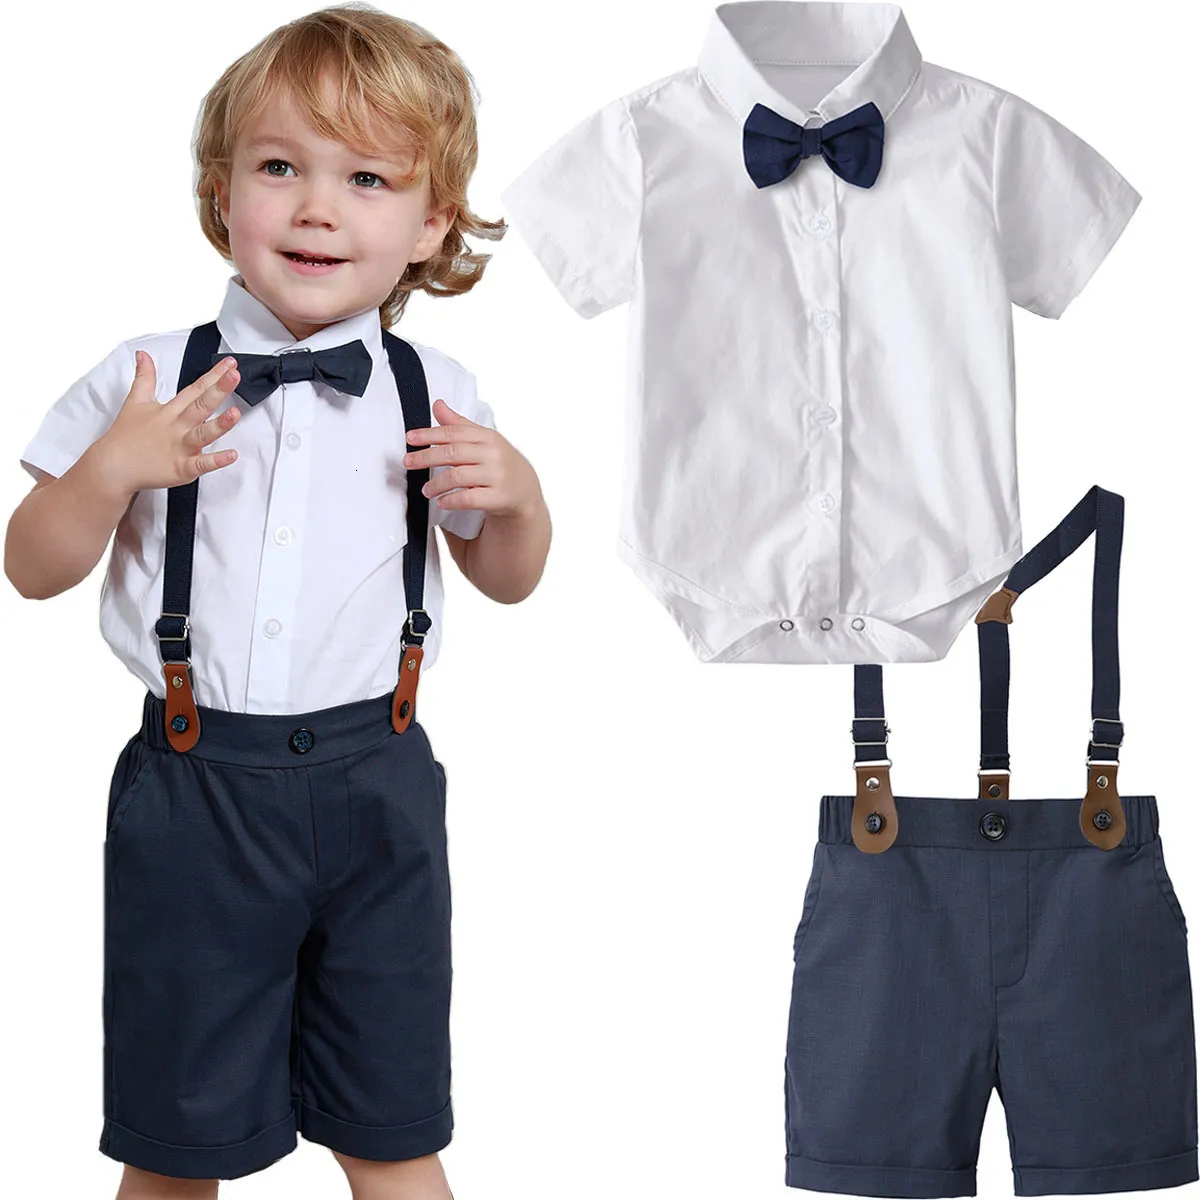 Rompers Byboys Baptism Outfit Infall Gentleman Clothing Set Toddler Christning短袖Bowtie Romper Suspendersパンツスーツ230628